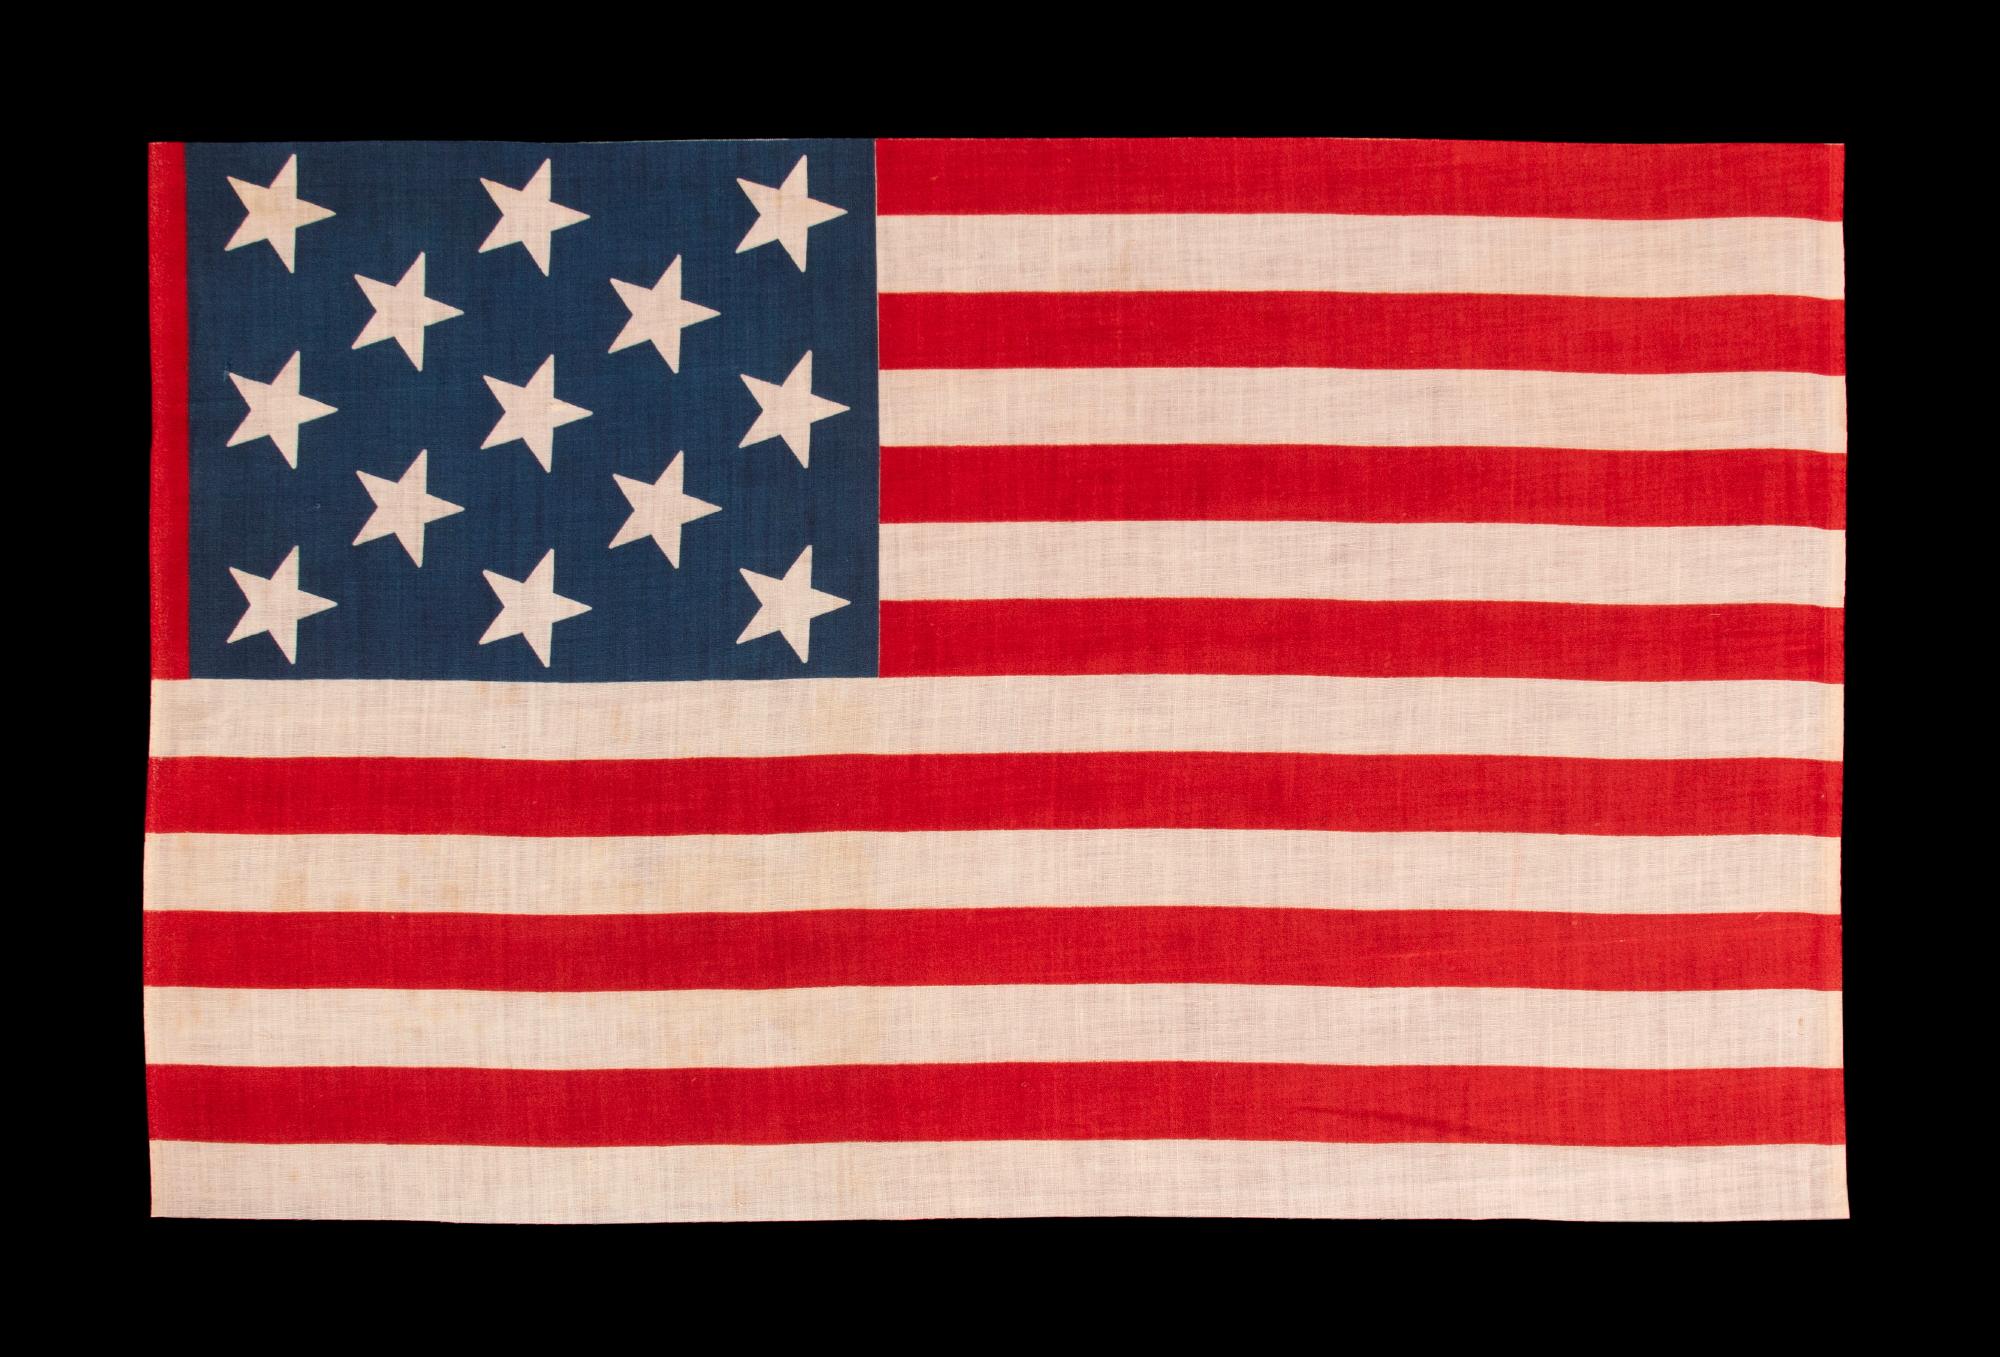 13 star antique American parade flag, with a 3-2-3-2-3 configuration of stars, an extremely scarce and unusually large variety, made circa 1876-1899:

13 star American national parade flag, printed on cotton, made sometime during the last quarter